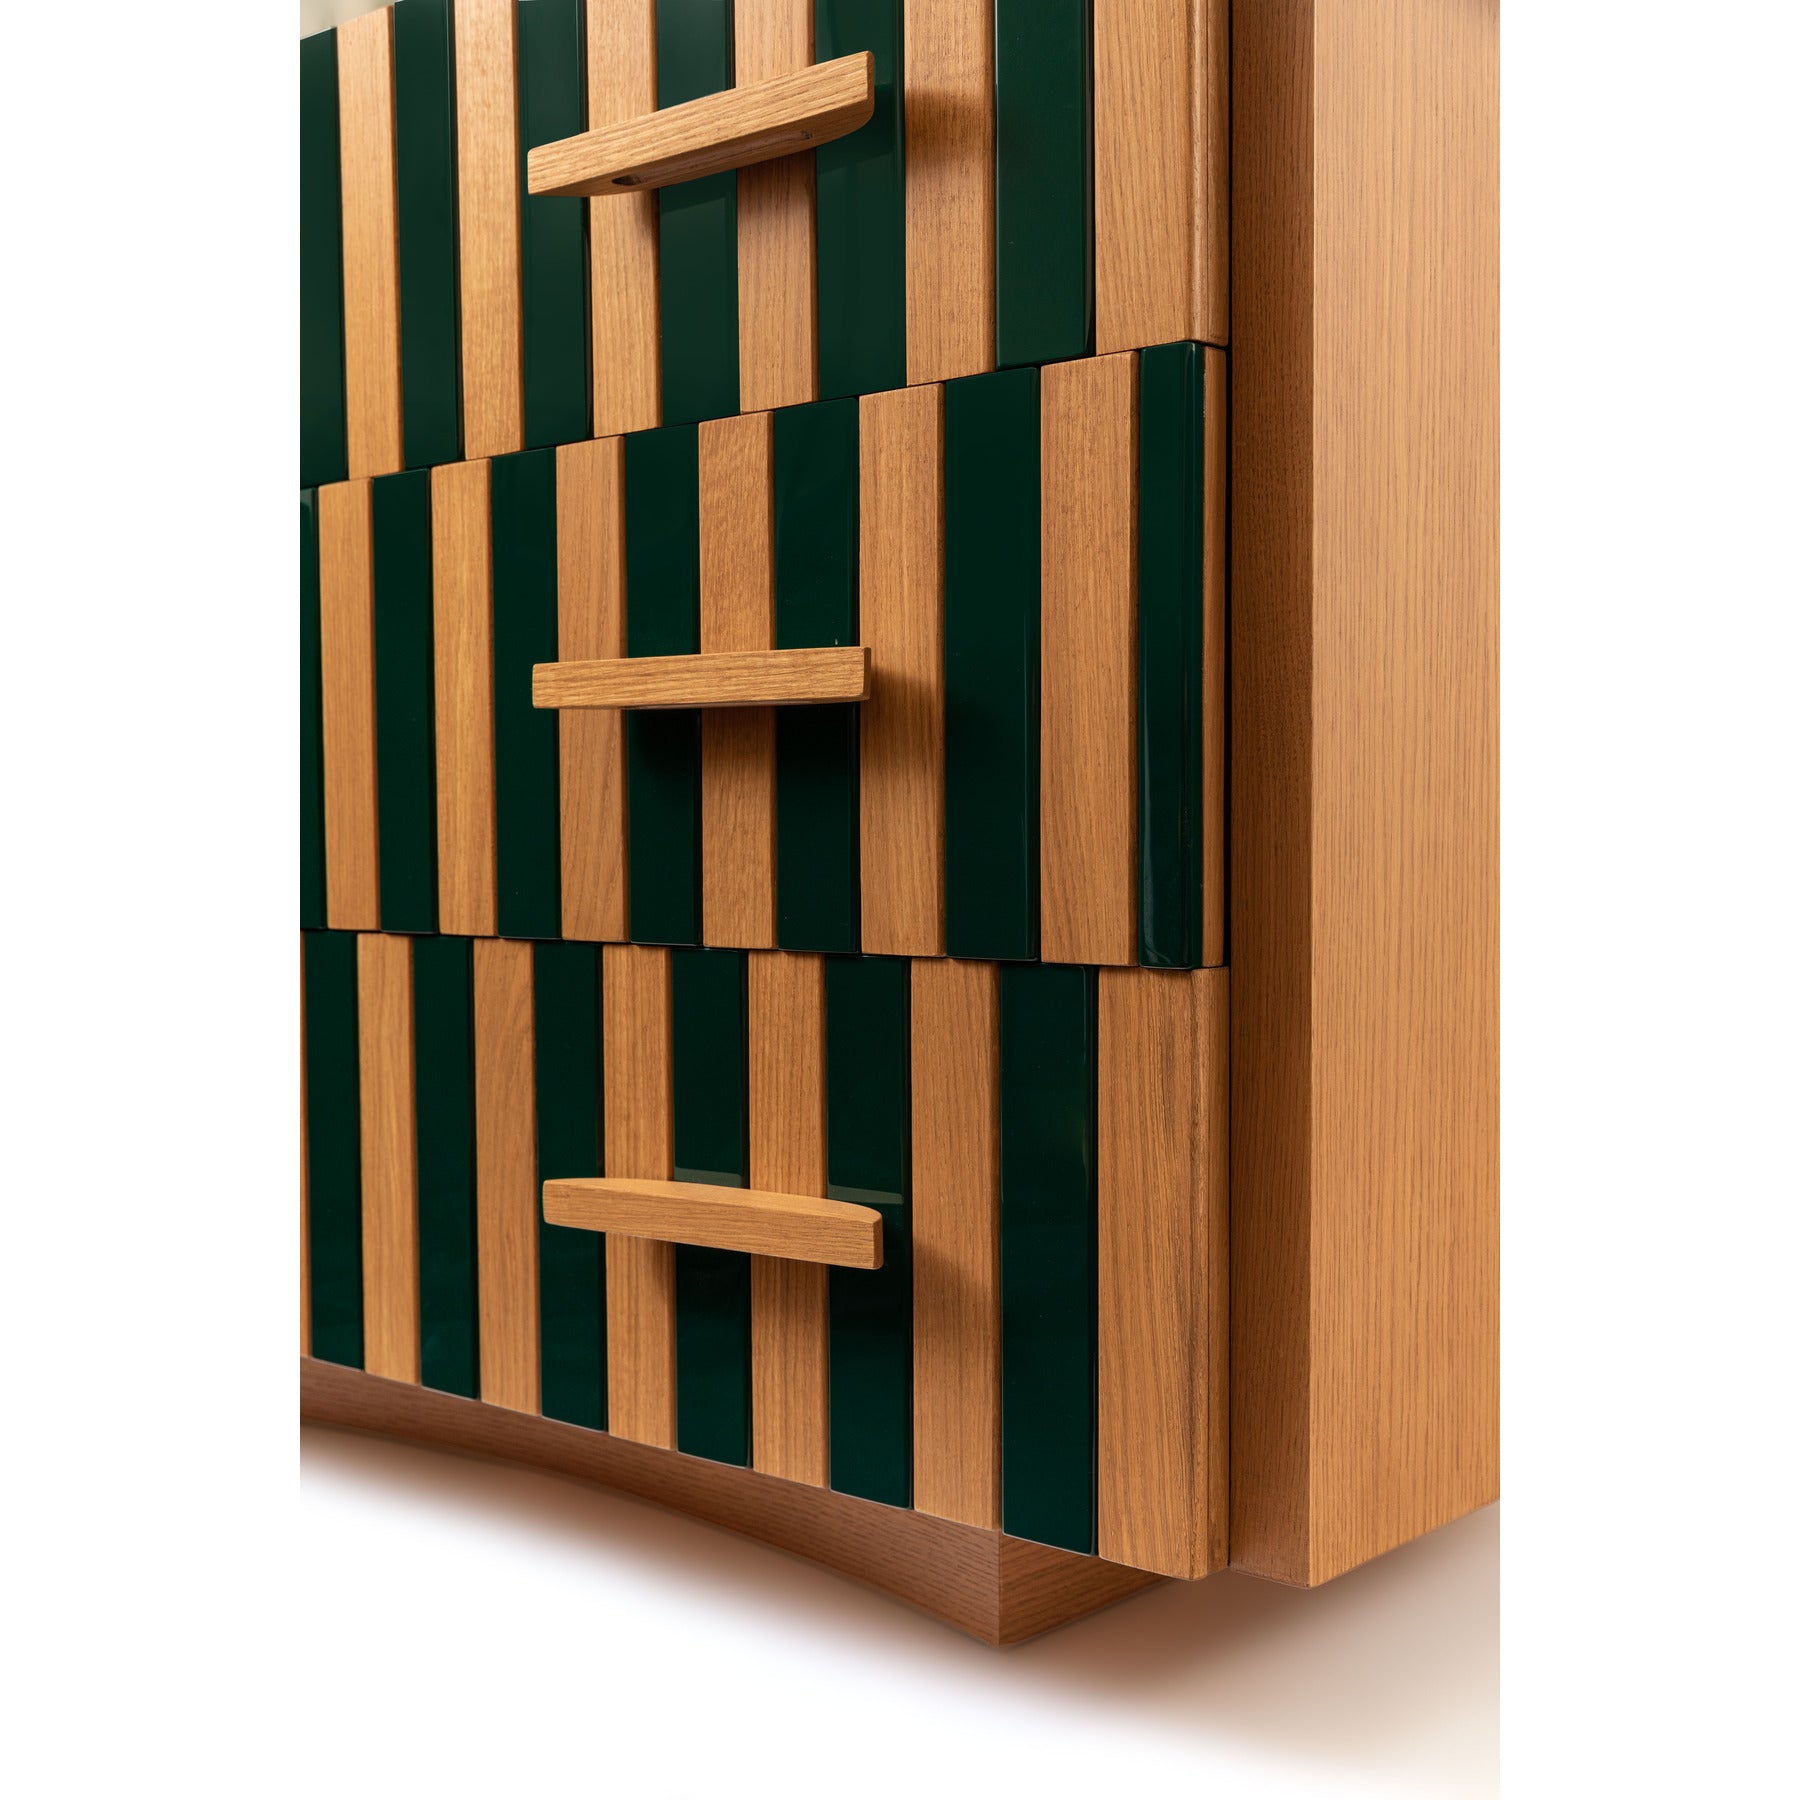 Mirage Chest of Drawers